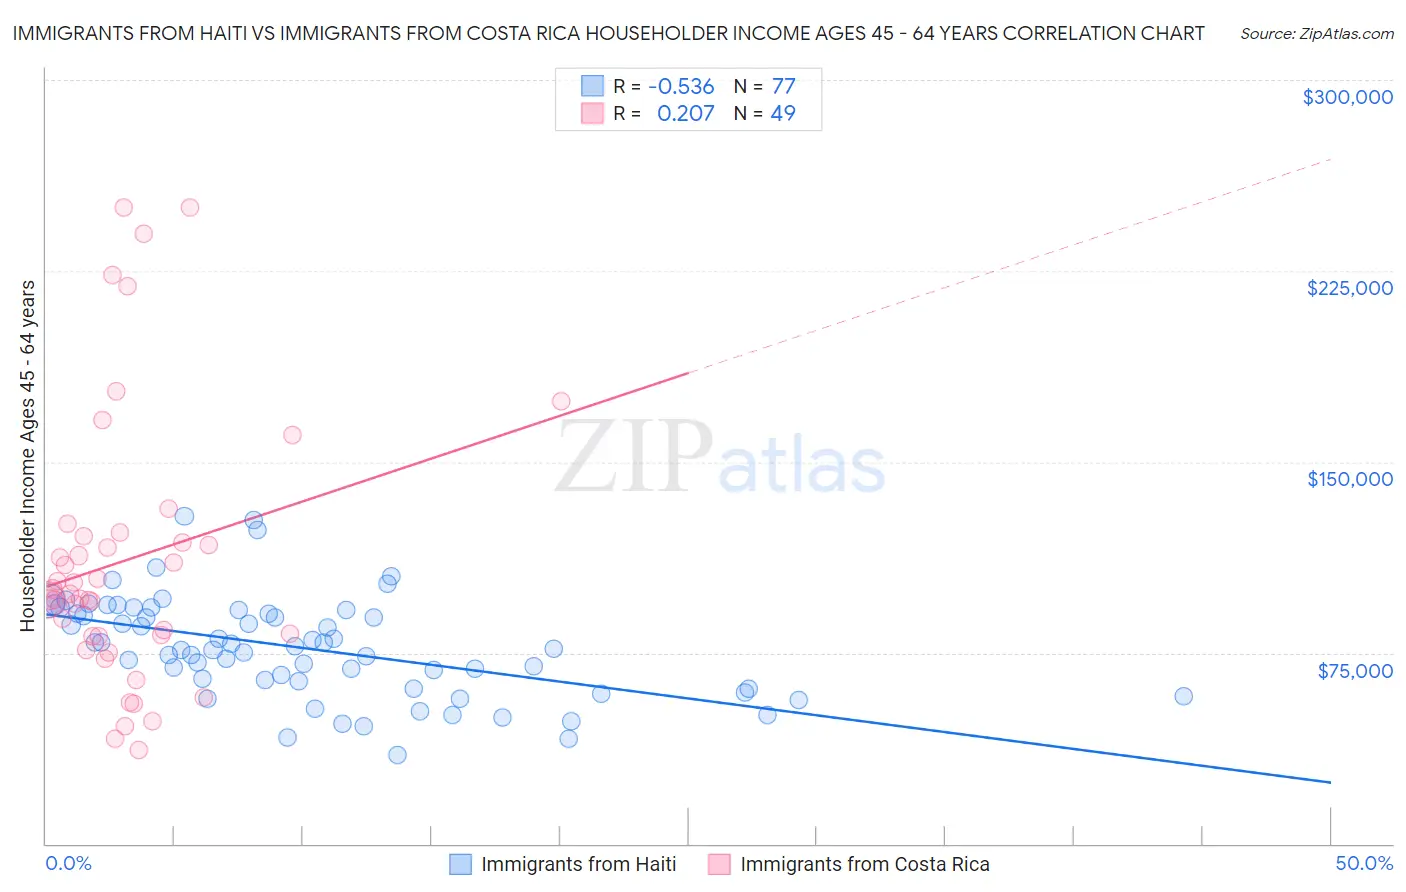 Immigrants from Haiti vs Immigrants from Costa Rica Householder Income Ages 45 - 64 years